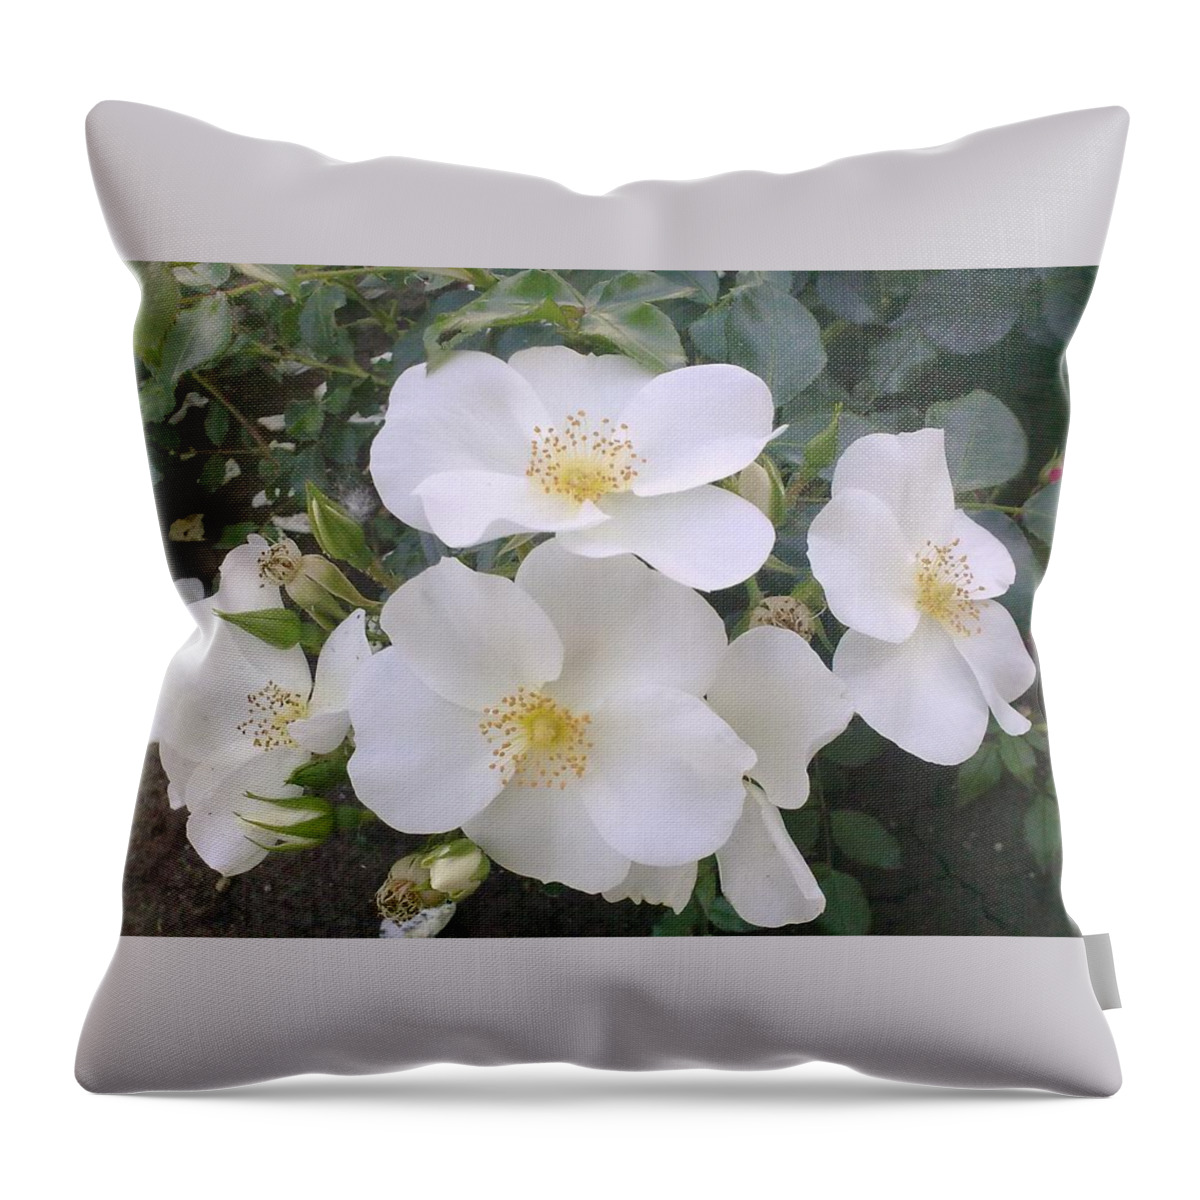 White Roses Throw Pillow featuring the painting White Roses Bloom by Georgeta Blanaru